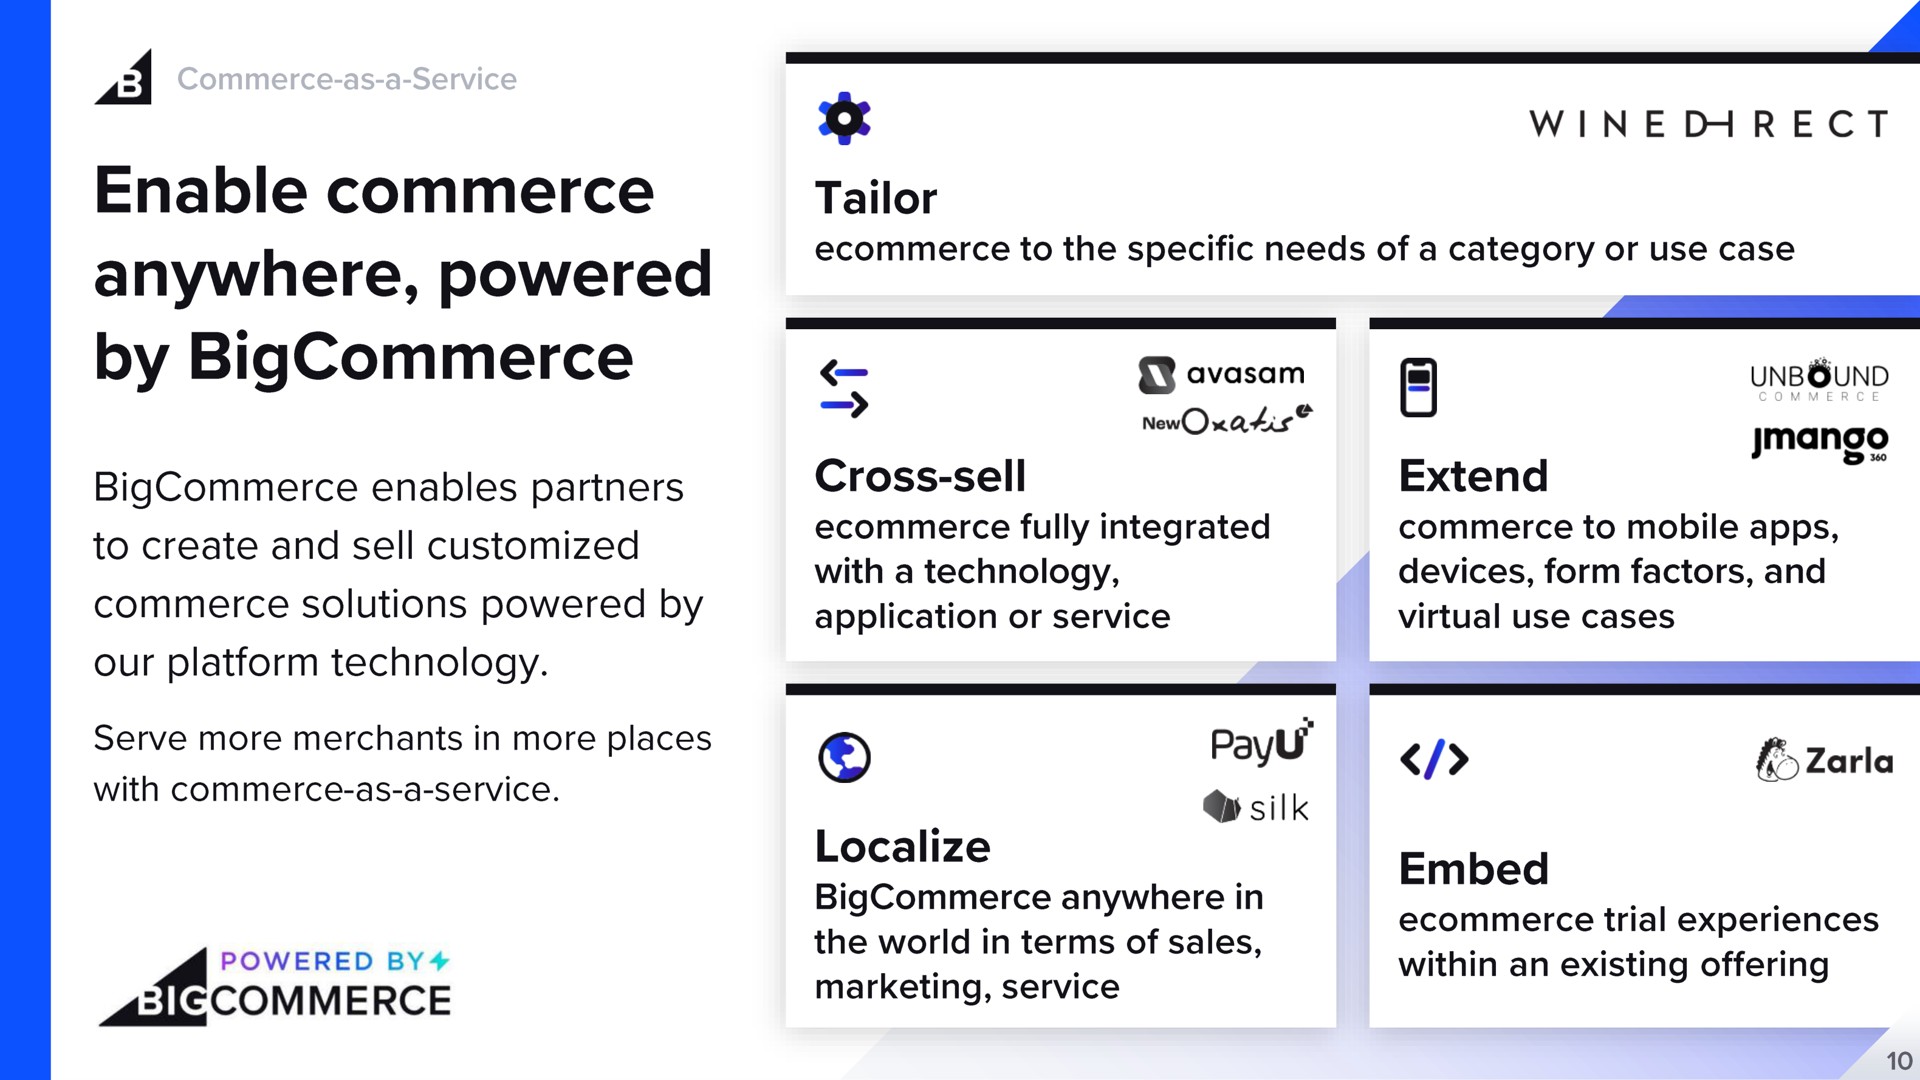 a enable commerce anywhere powered enables partners our technology tailor wine direct cross sell localize extend embed | BigCommerce